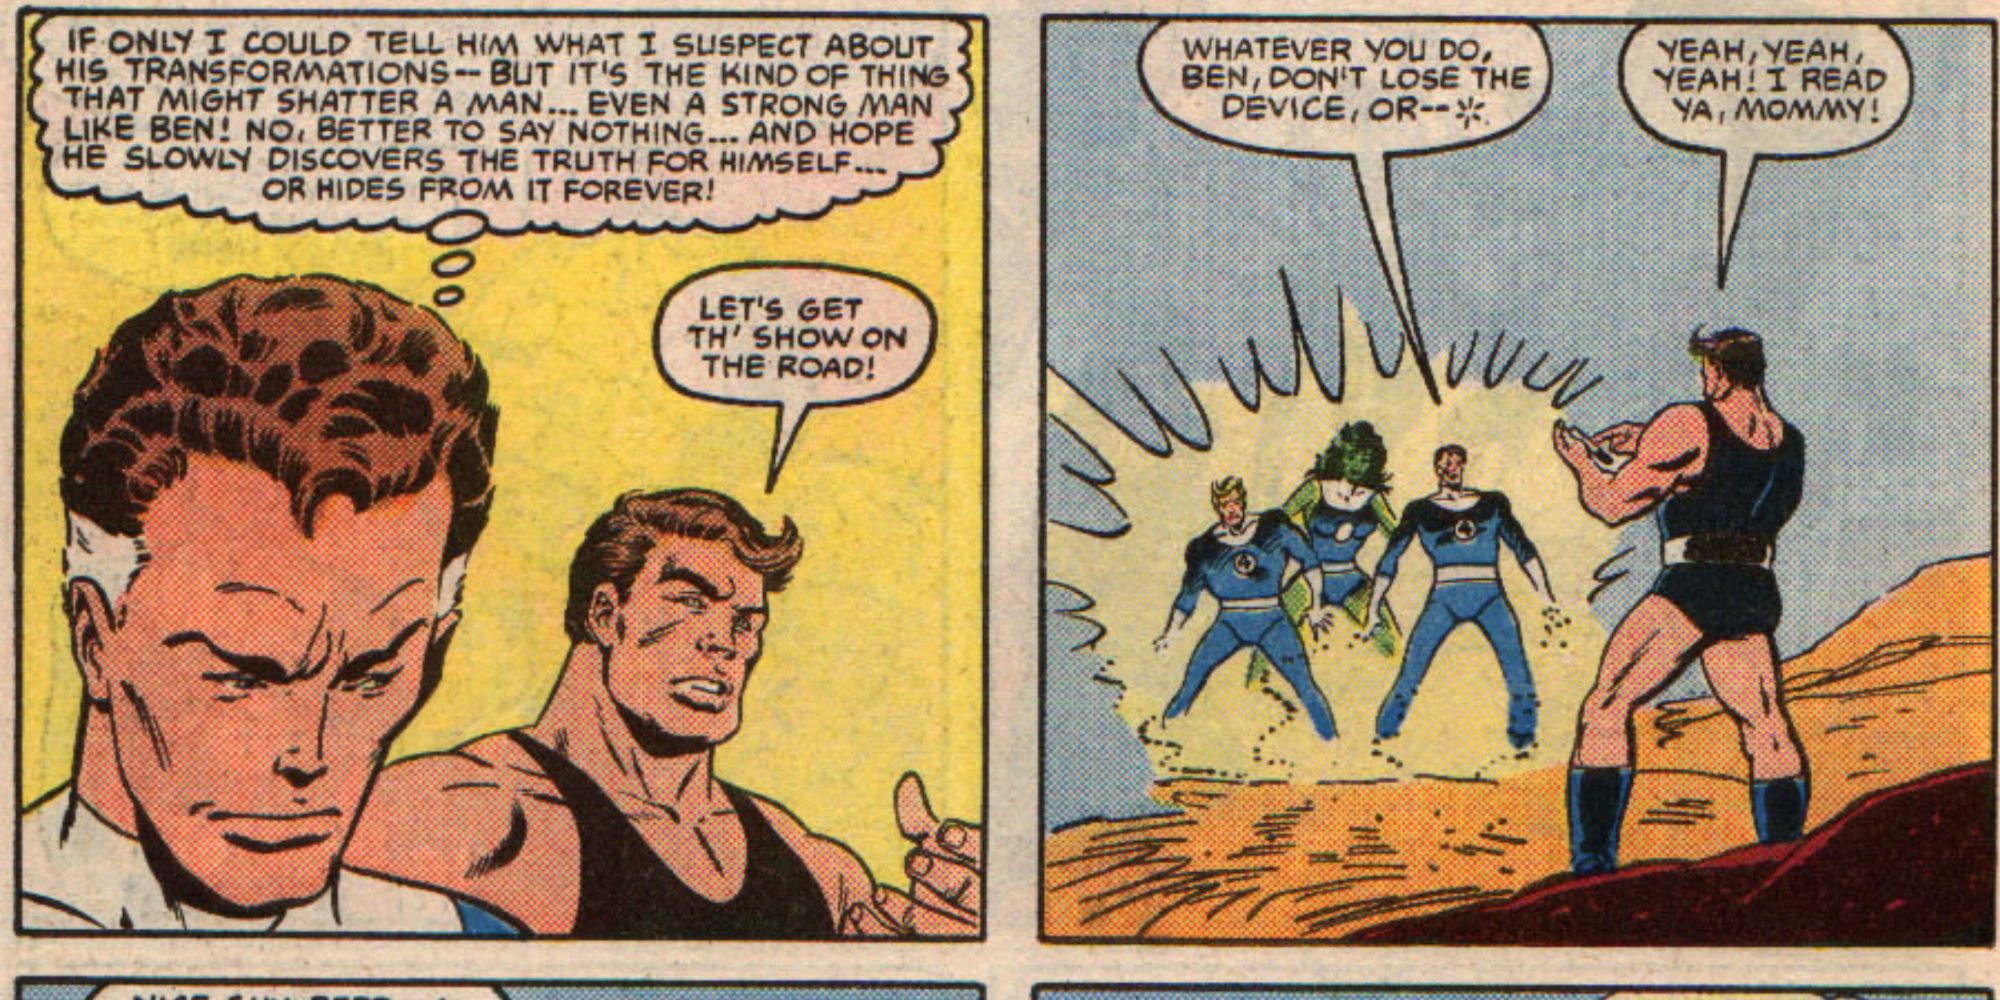 An image of Mr. Fantastic and the Fantastic Four in Marvel Comic's Secret Wars.